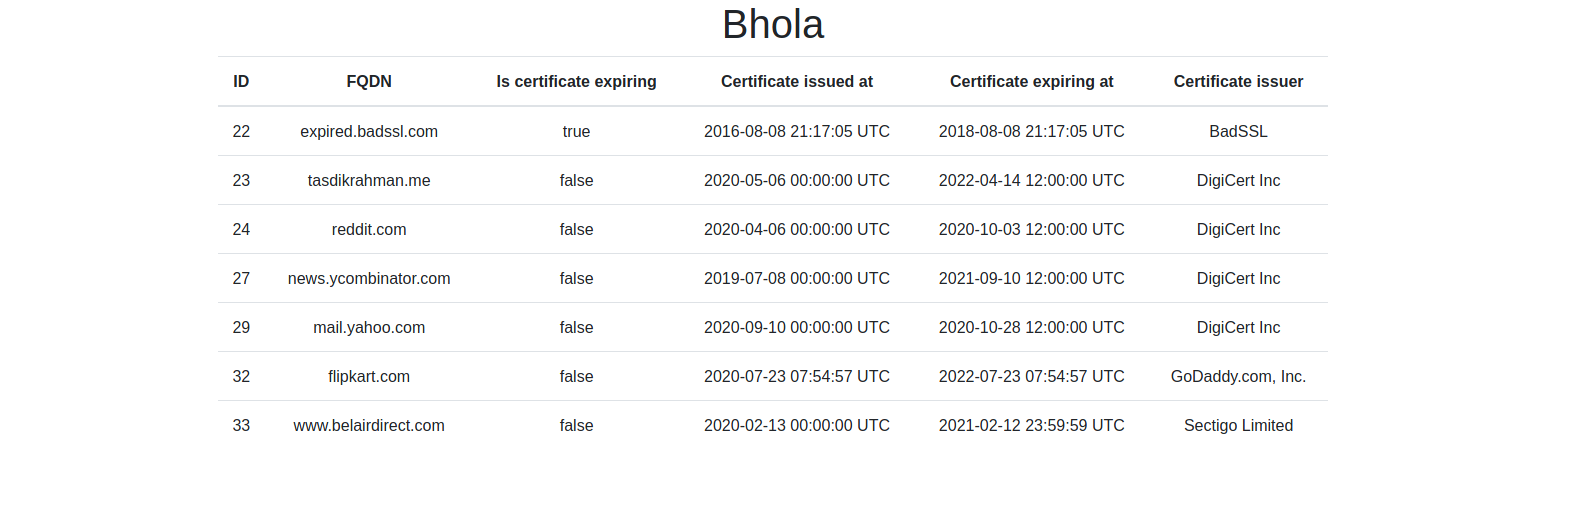 The making of bhola - your cert expiration overseer - Part 1